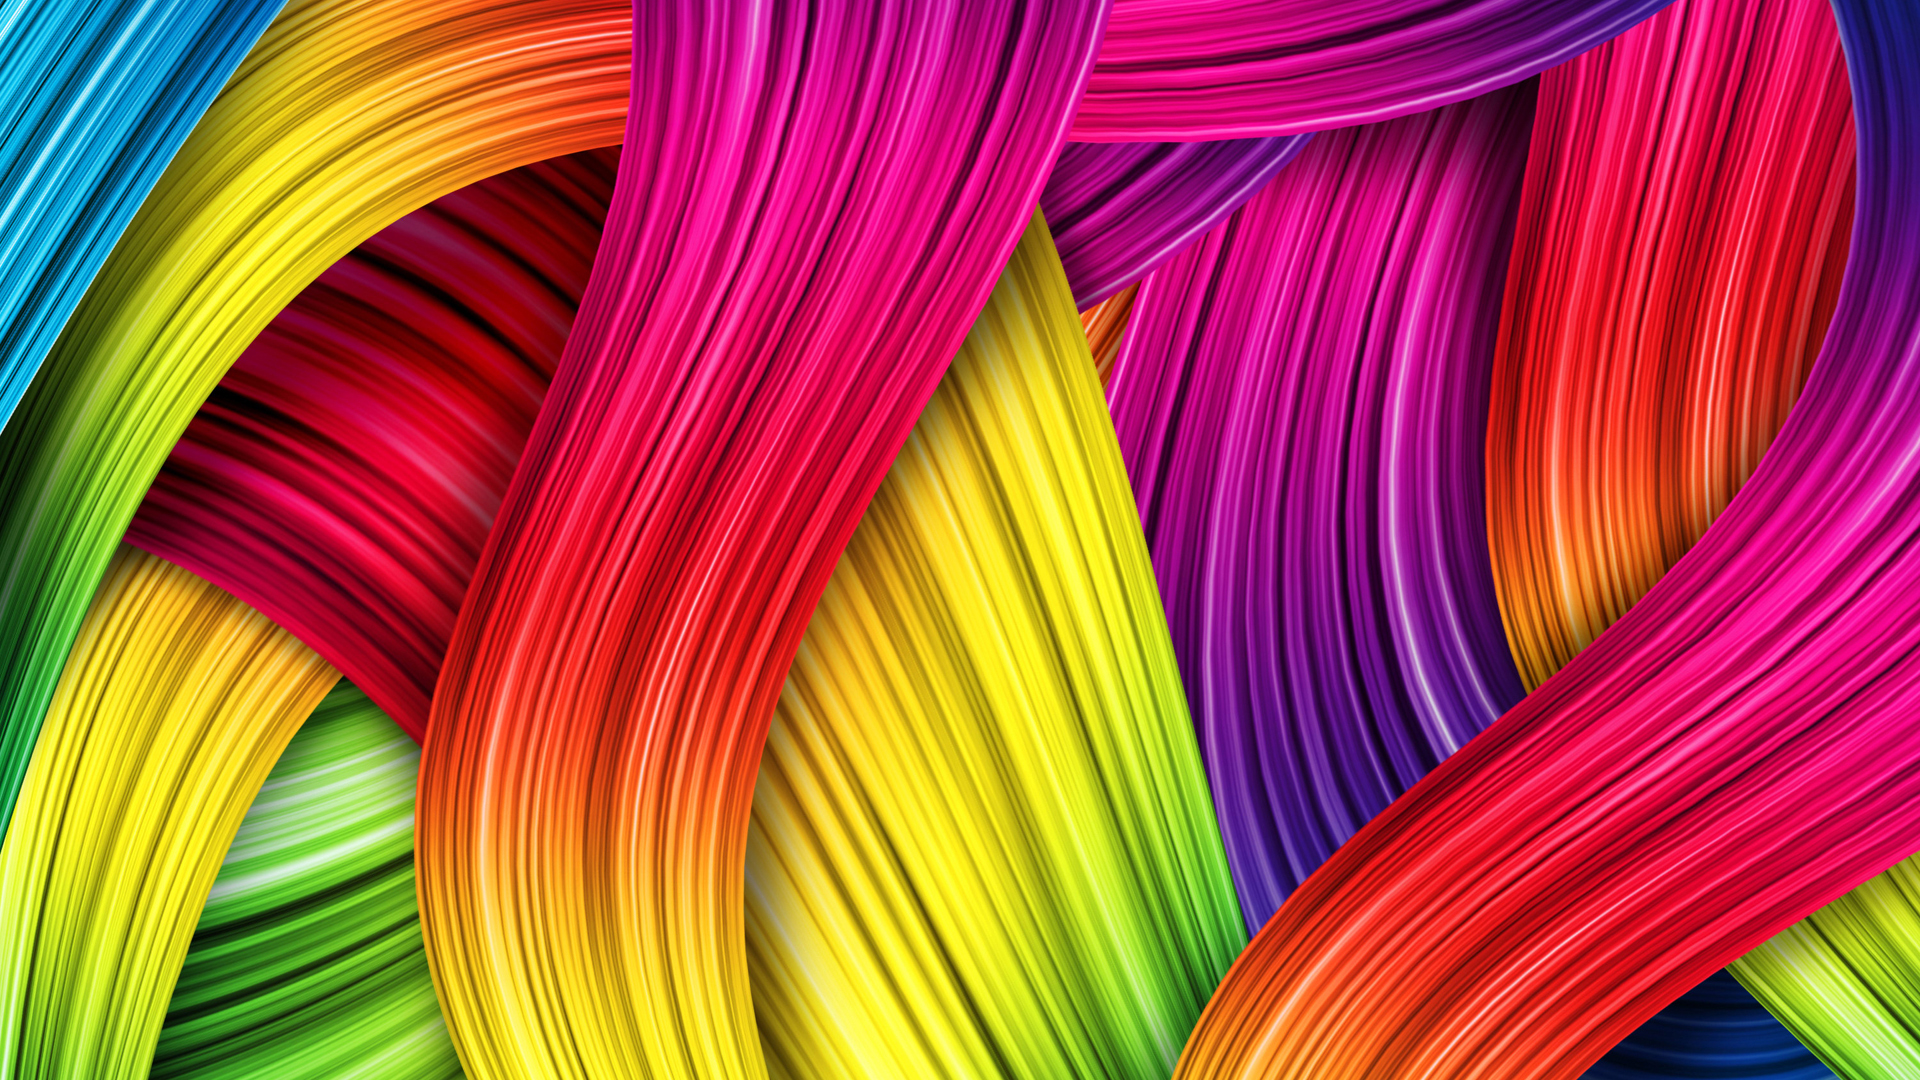 Related Post To Colorful Abstract HD Desktop Wallpaper